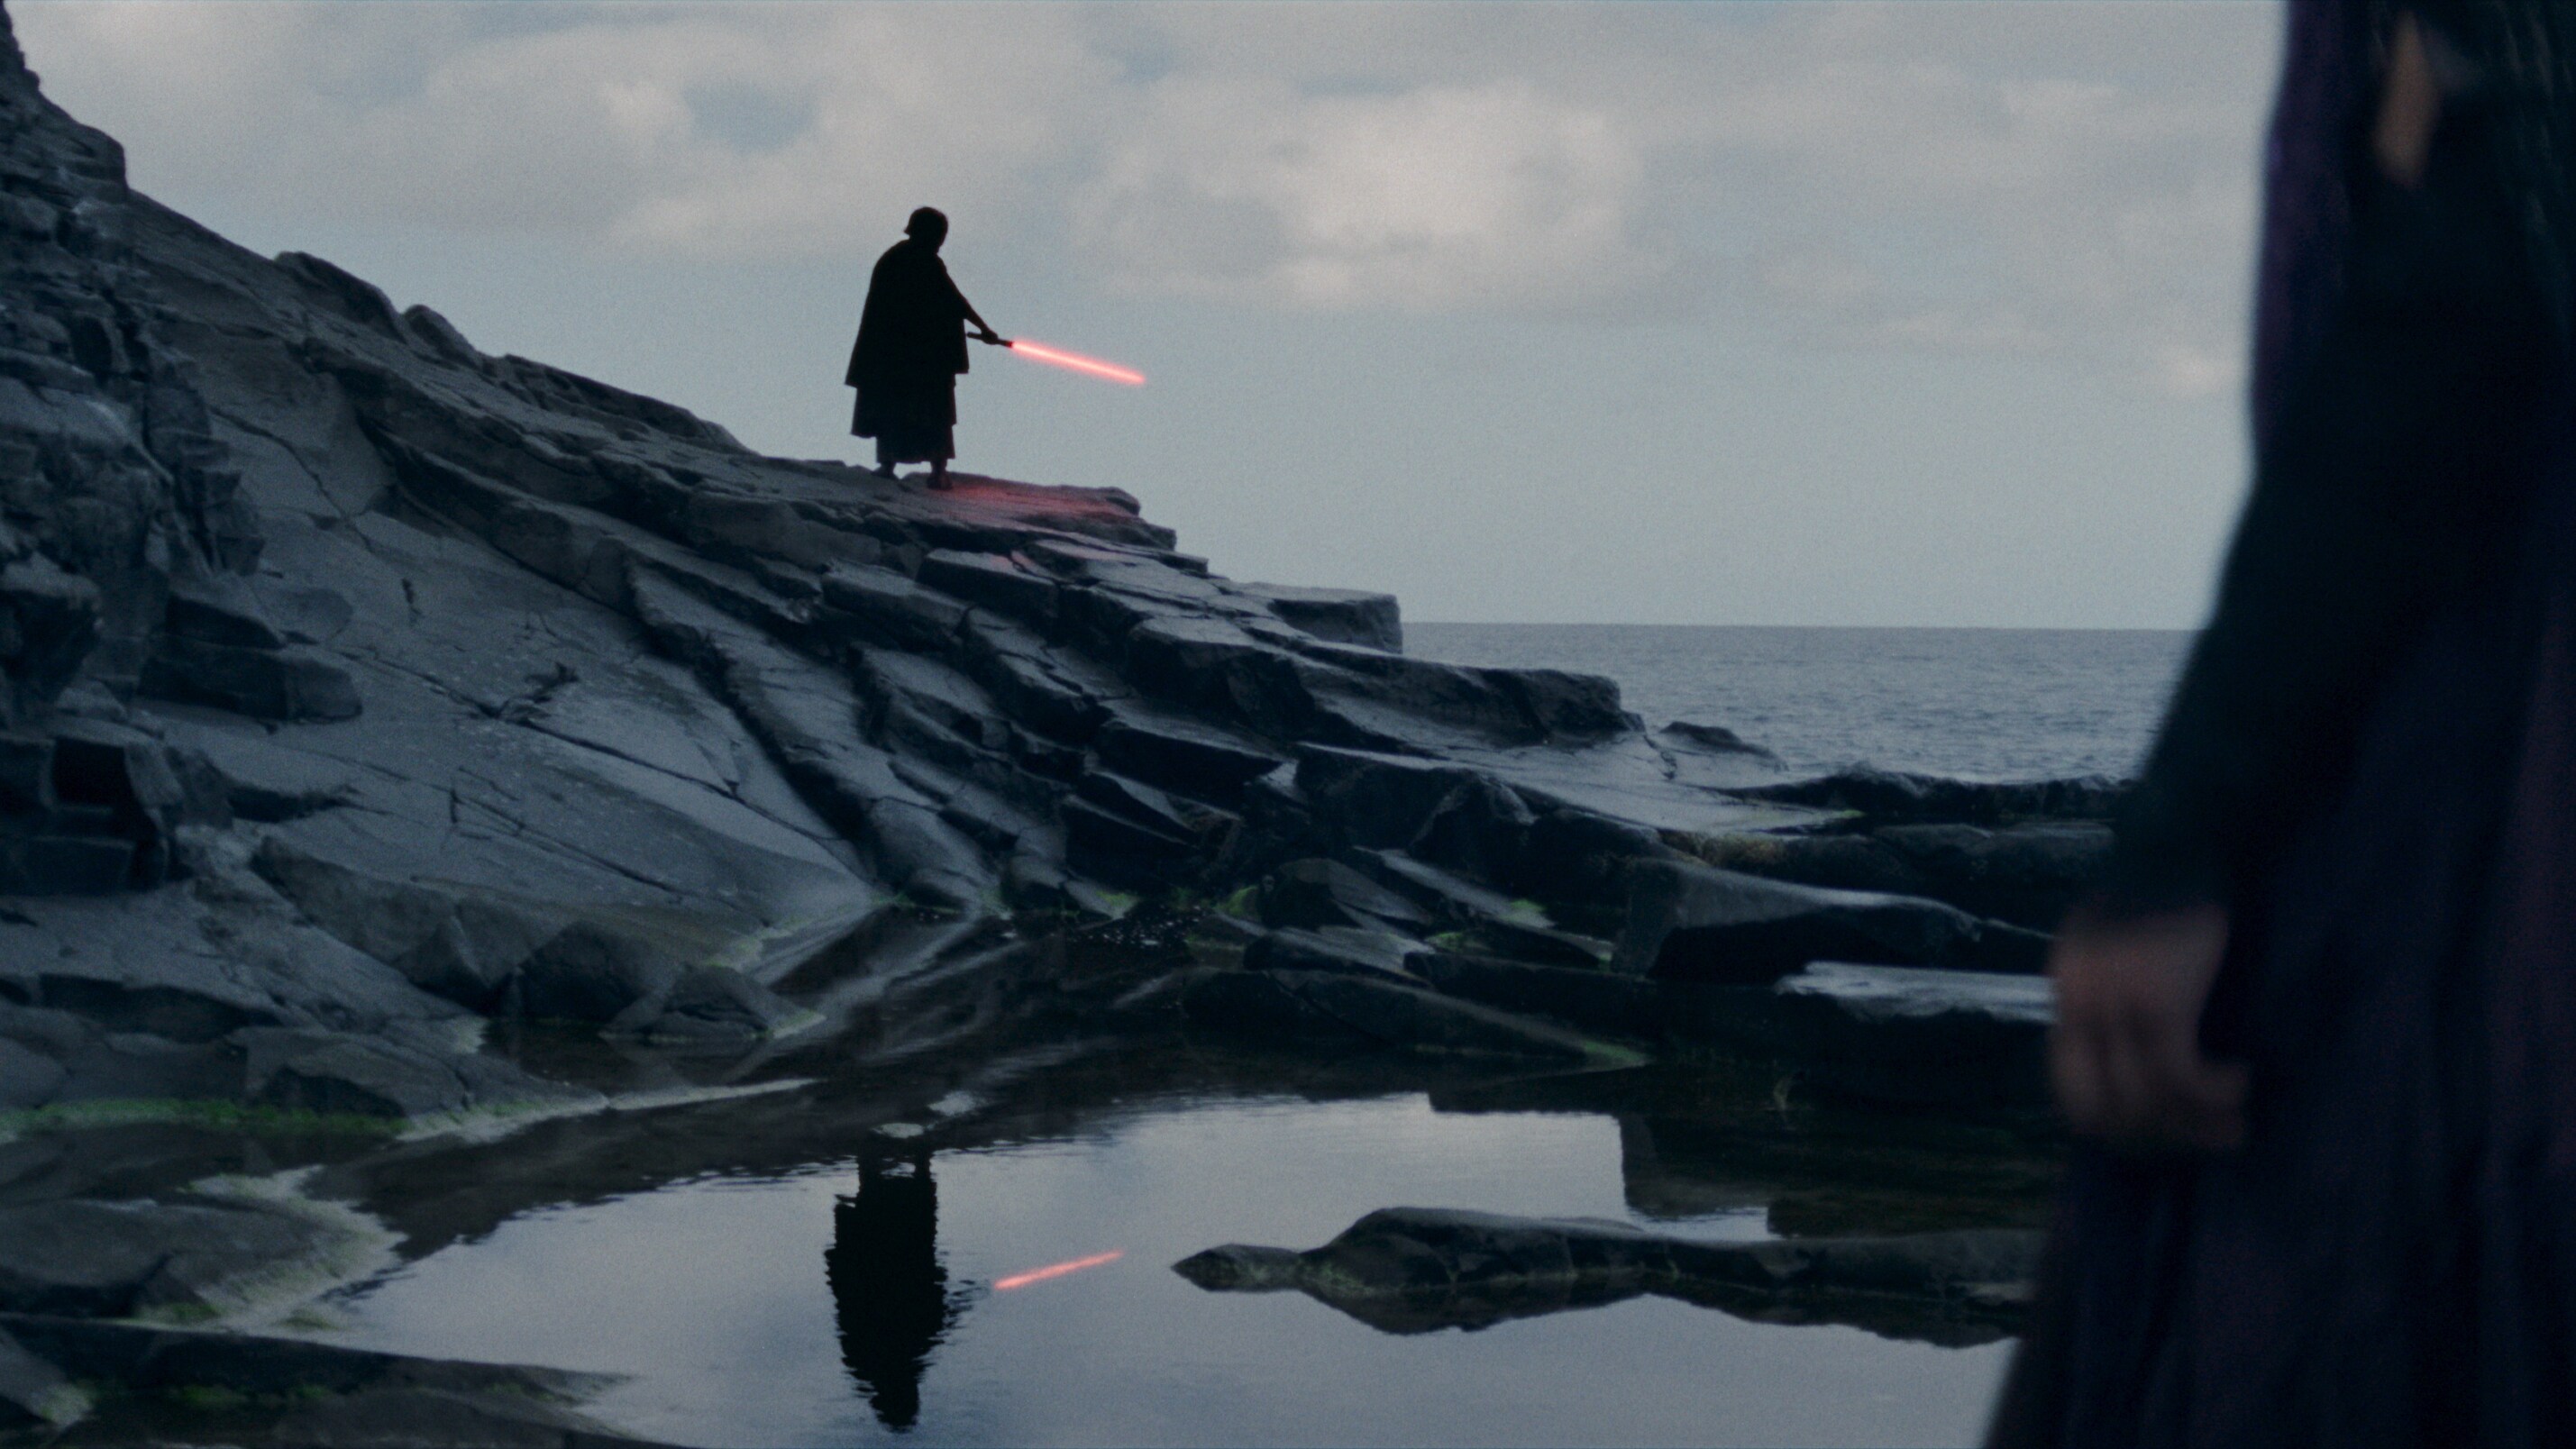 Establishing shot featuring red lightsaber in the Acolyte 